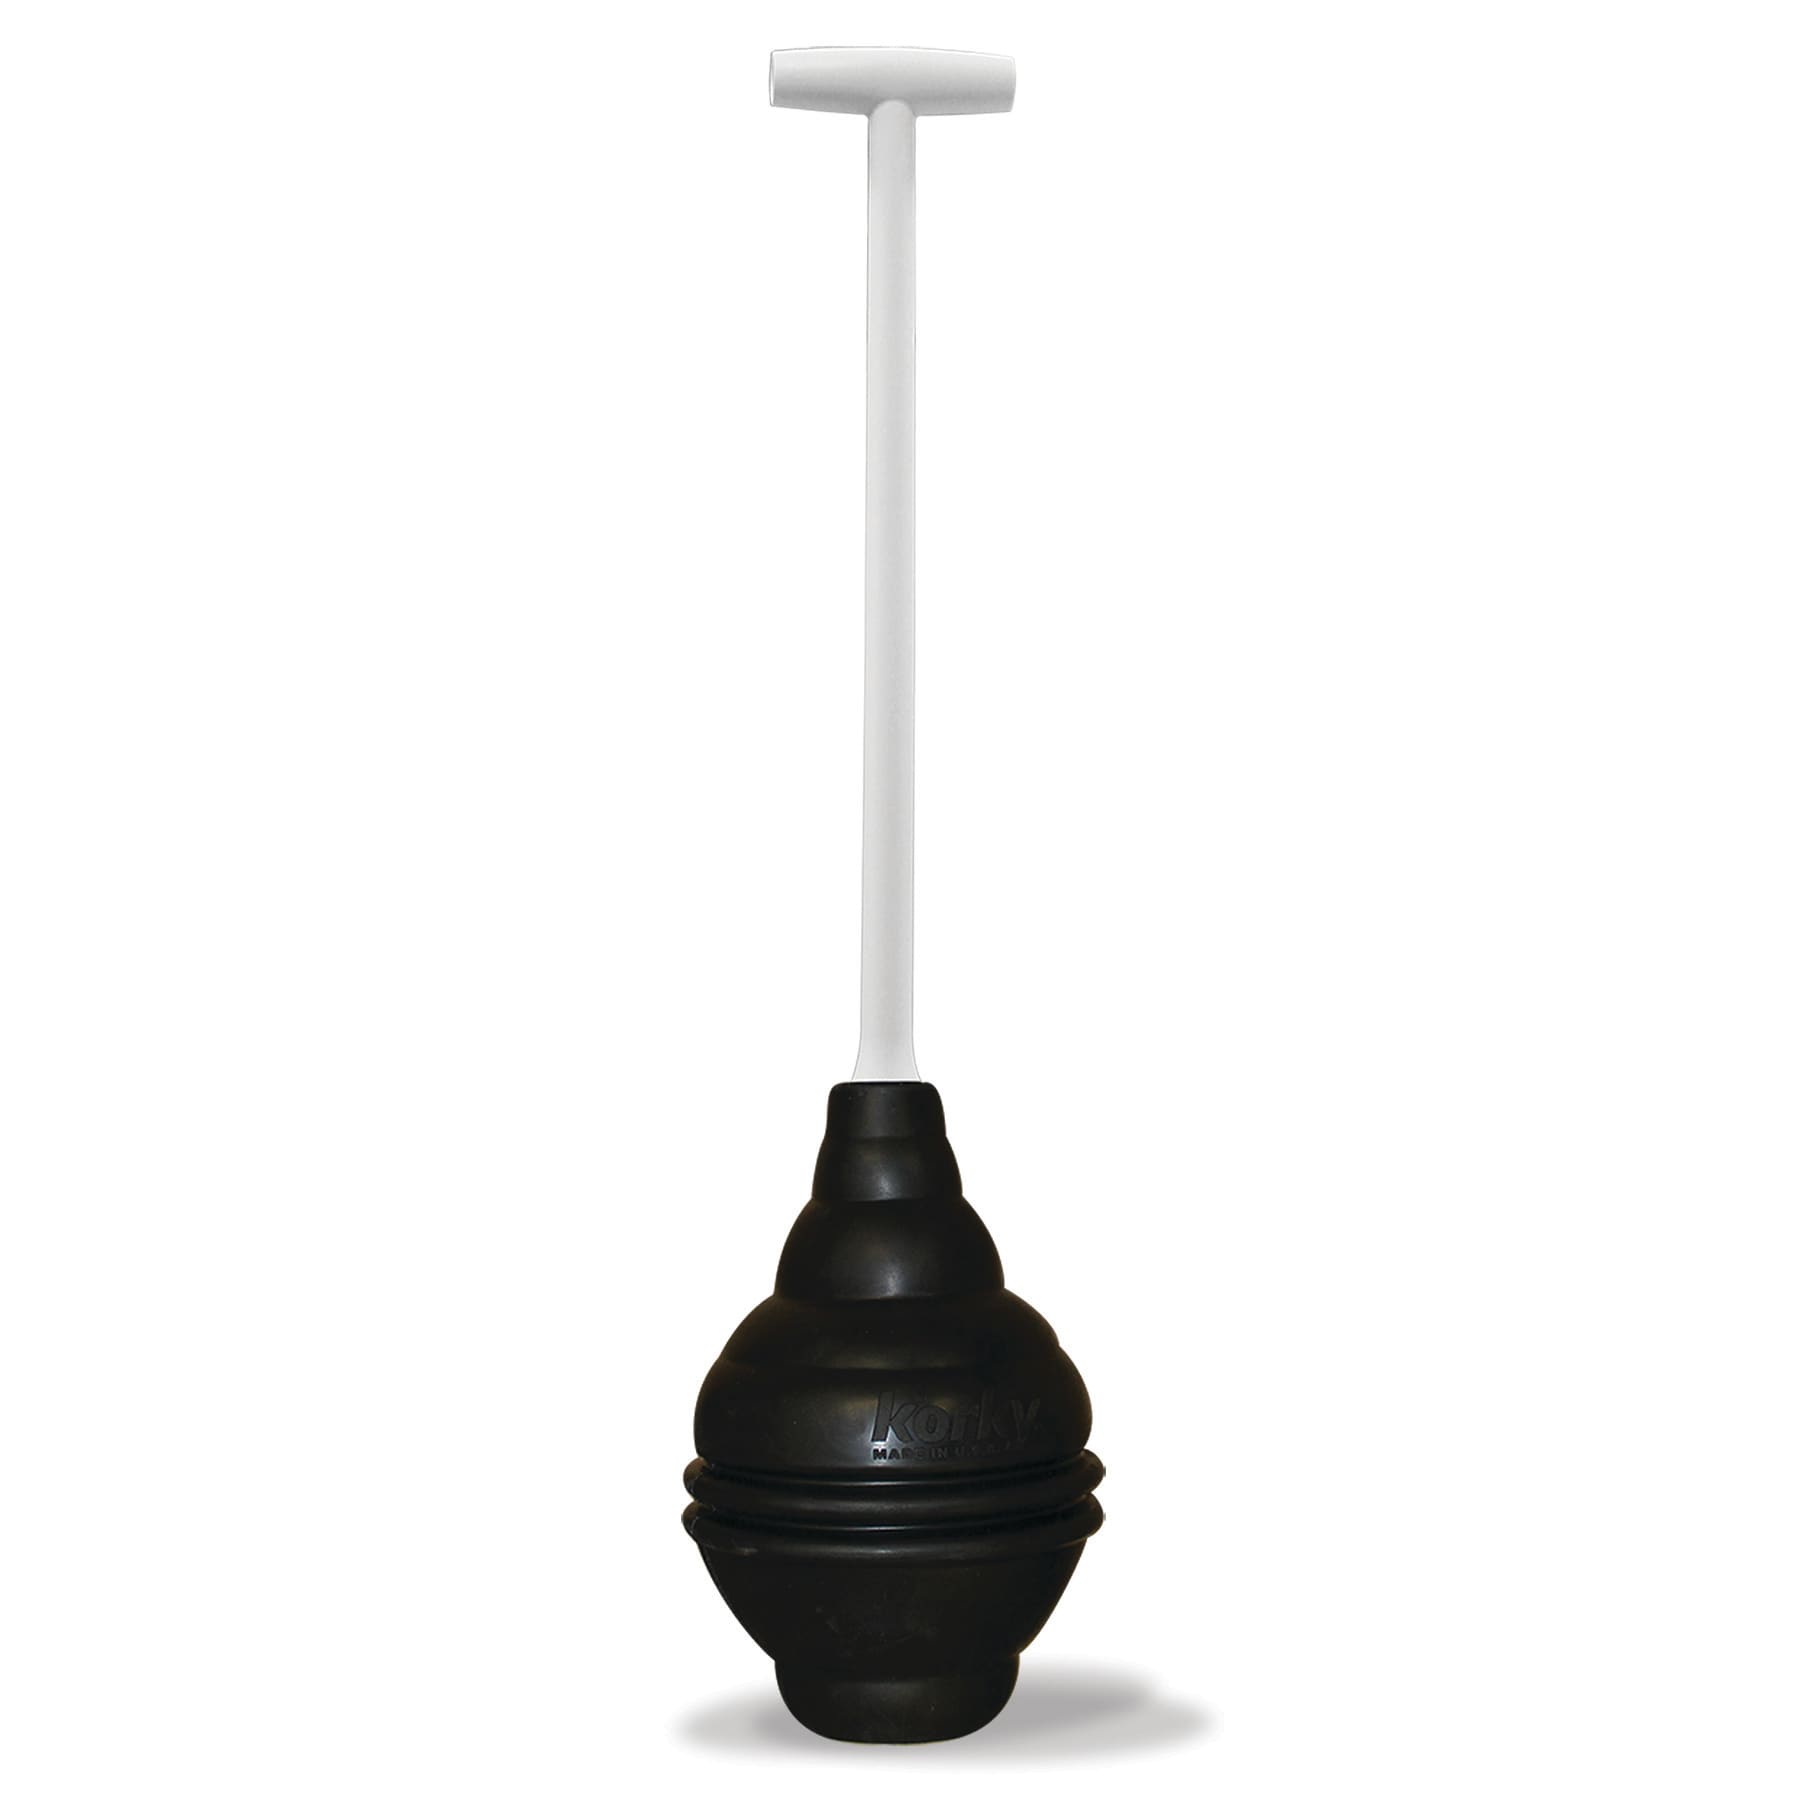 4 Types of Drain Plungers and How to Choose One